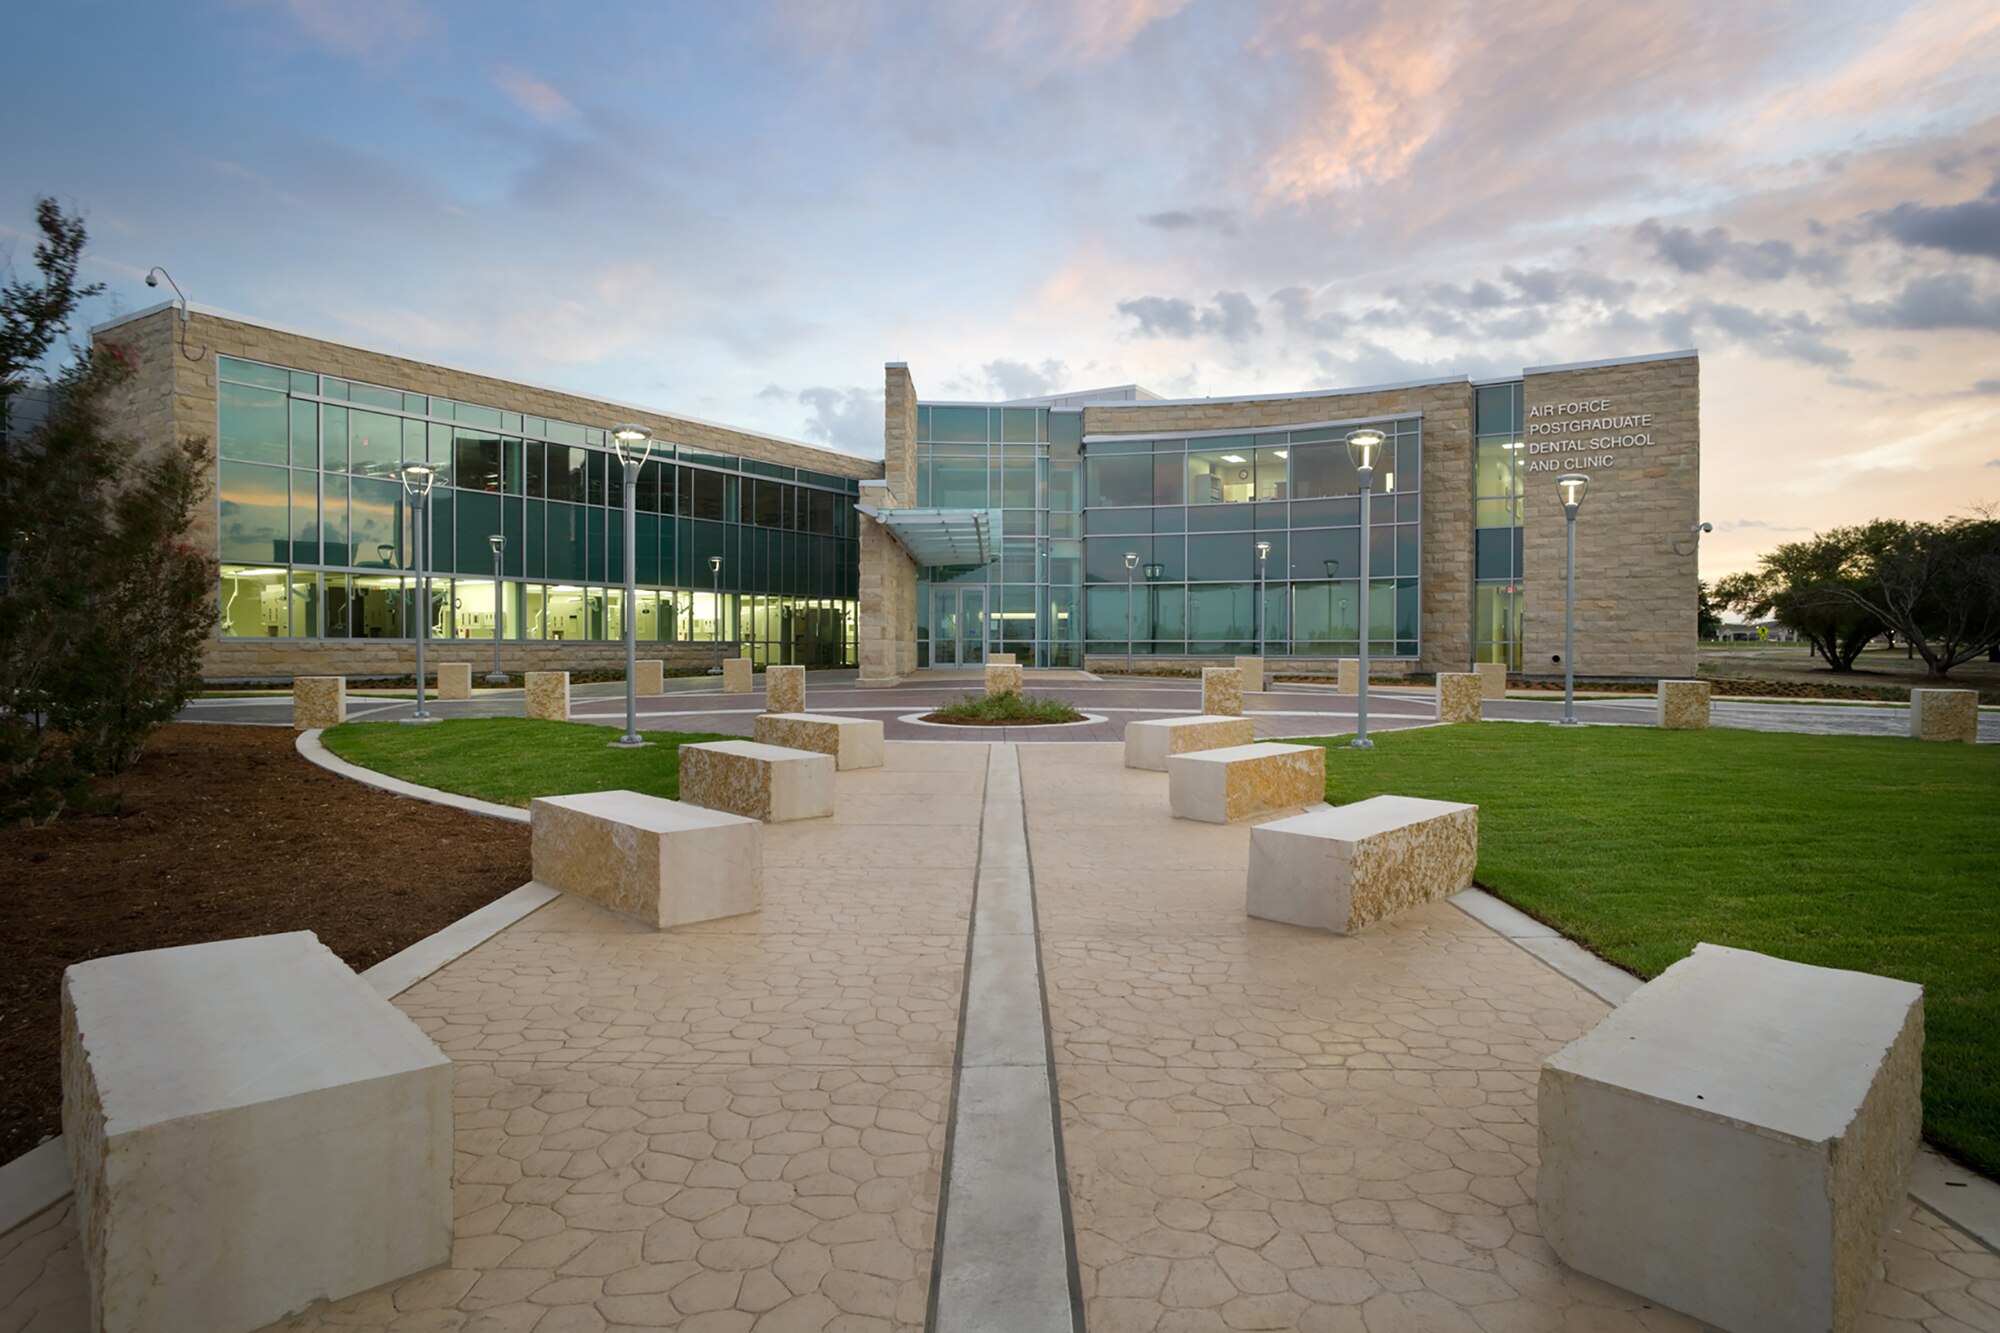 The Postgraduate Dental School and Clinic at Joint Base San Antonio-Lackland, Texas, shared top honors for facility design in the 2014 Air Force Design Awards. The awards program recognized seven projects across three levels exemplifying the service’s focus on sustainable infrastructure. (Courtesy photo)